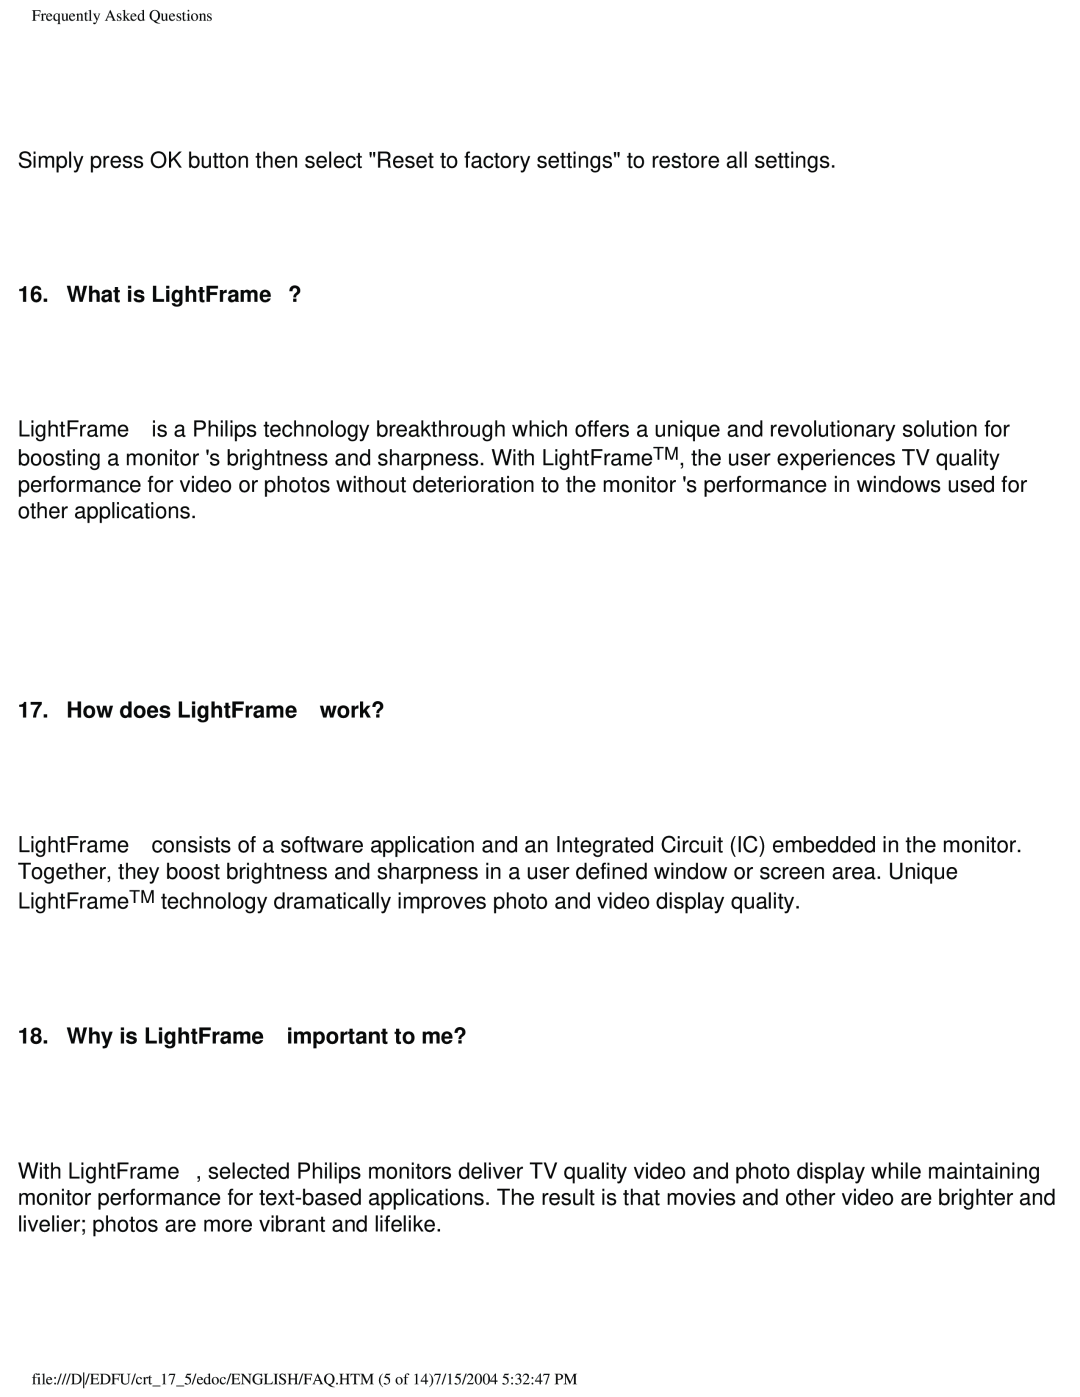 Philips 109F5, 107S5, 107T5, 109B5 What is LightFrame™ ?, How does LightFrame™ work?, Why is LightFrame™ important to me? 